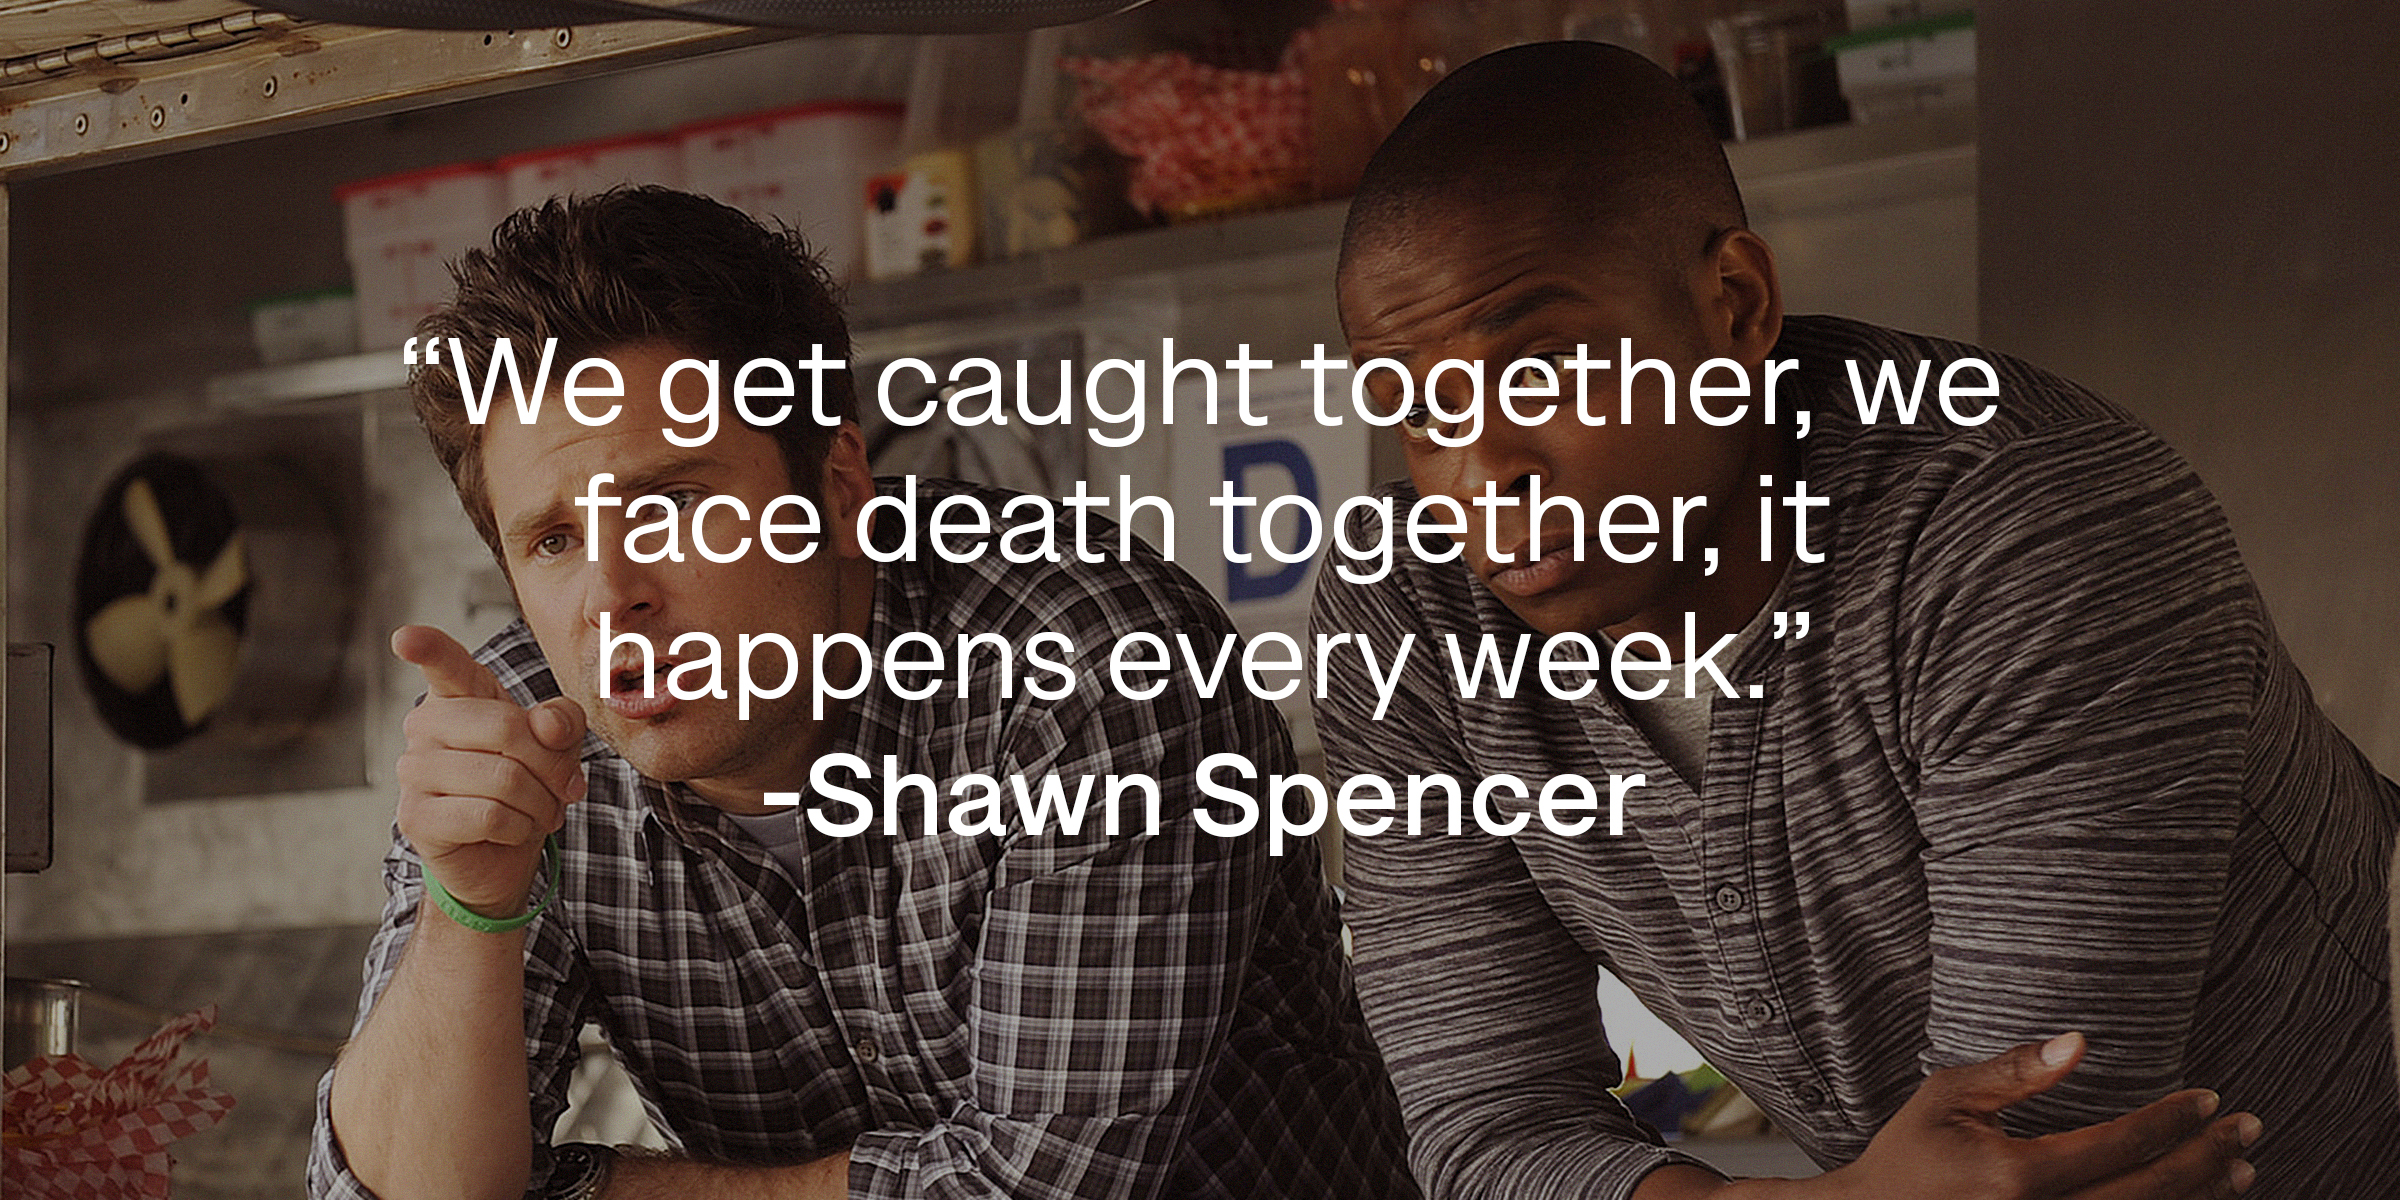 Shawn Spencer and Burton “Gus” Guster, with Spencer’s quote: "We get caught together, we face death together, it happens every week.” | Source: facebook.com/PsychPeacock